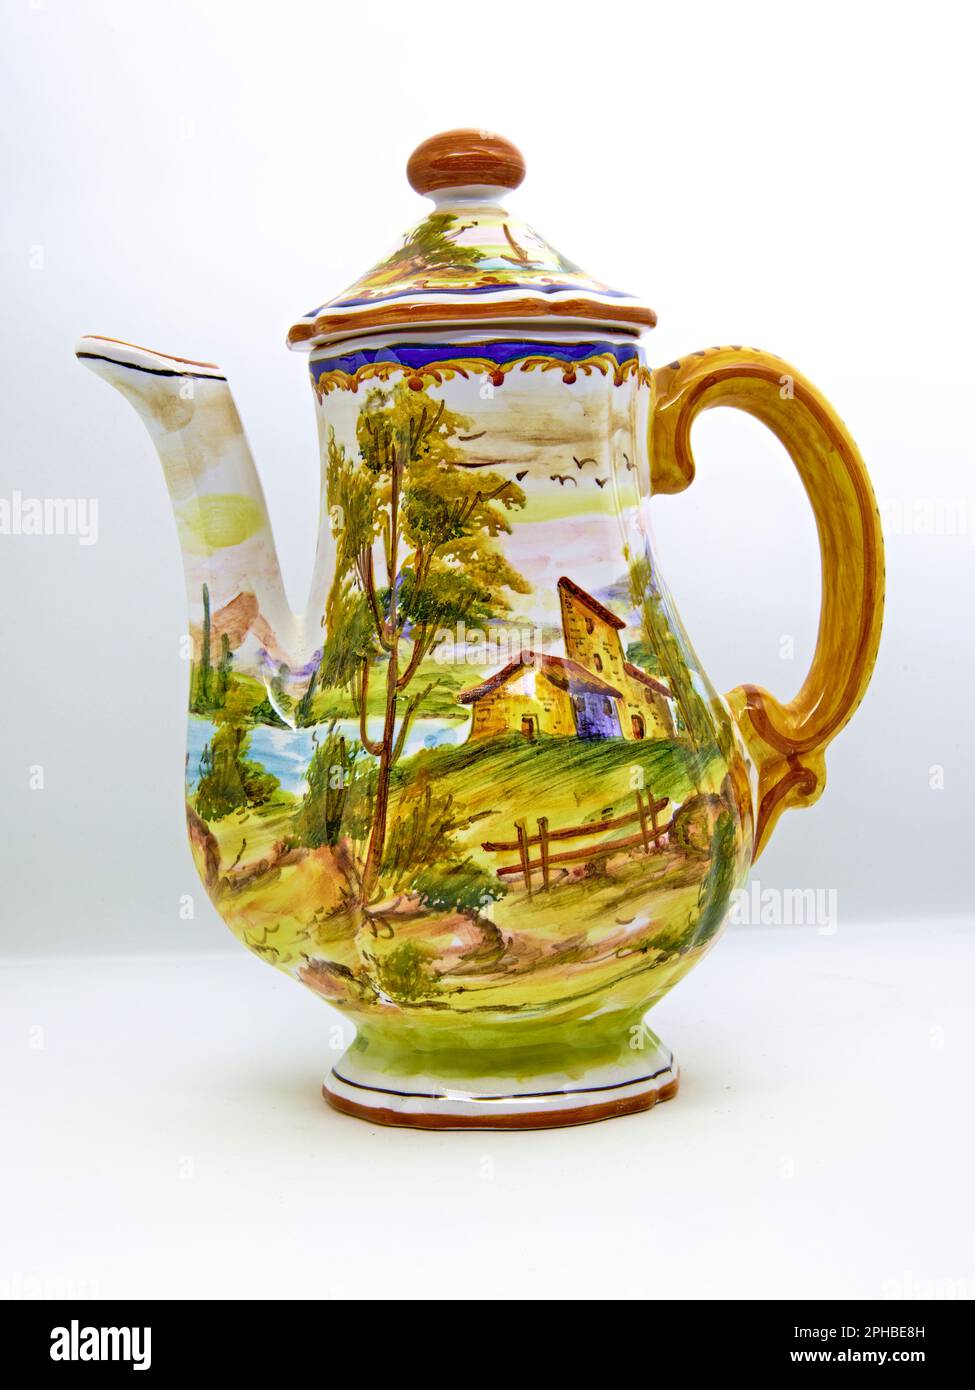 Vintage tea pot isolated on white background. With a French country scene. Made in Italy. Stock Photo